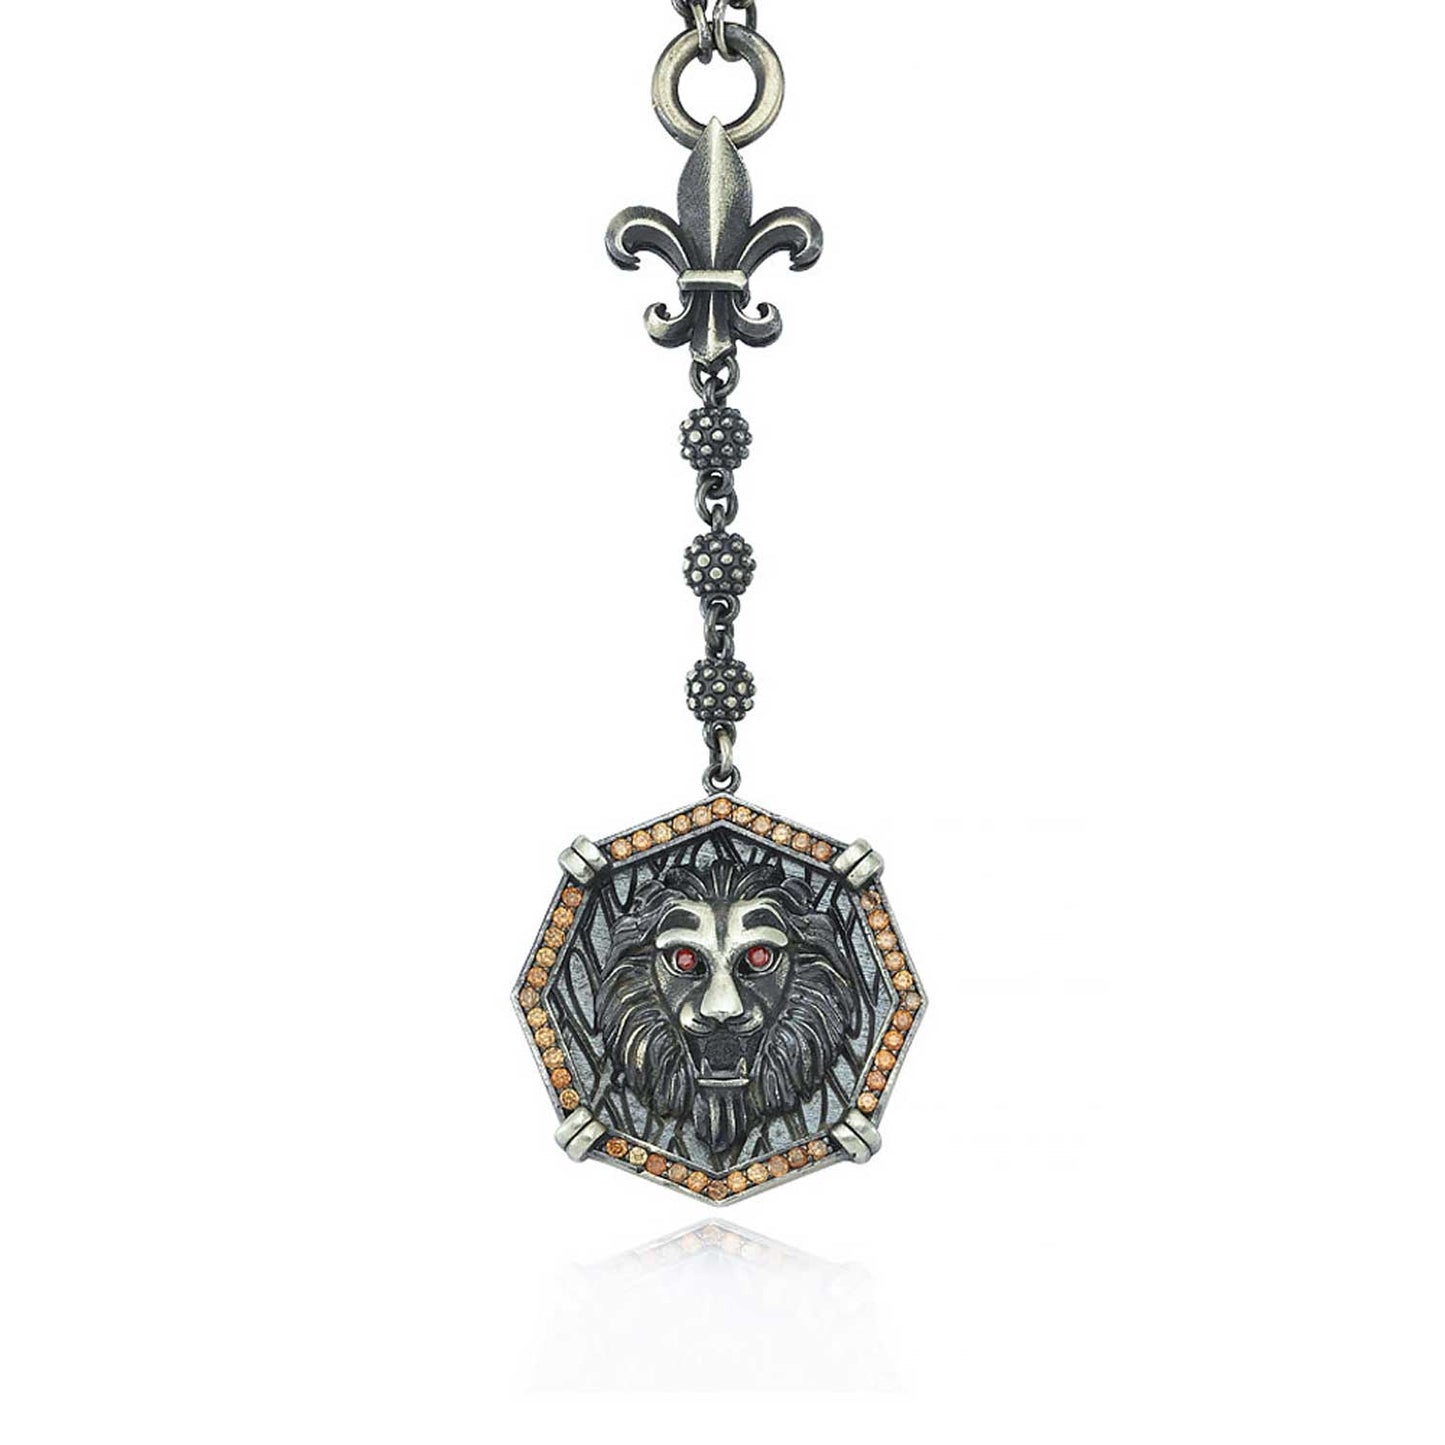 RARE PRINCE by CARAT SUTRA | Unique Silver Balls & Natural Tiger Eye Beaded Chain Necklace with Lion Head | 925 Sterling Silver Oxidized Pendant with Fleur-de-lis Symbol | Men's Jewelry | With Certificate of Authenticity and 925 Hallmark - caratsutra